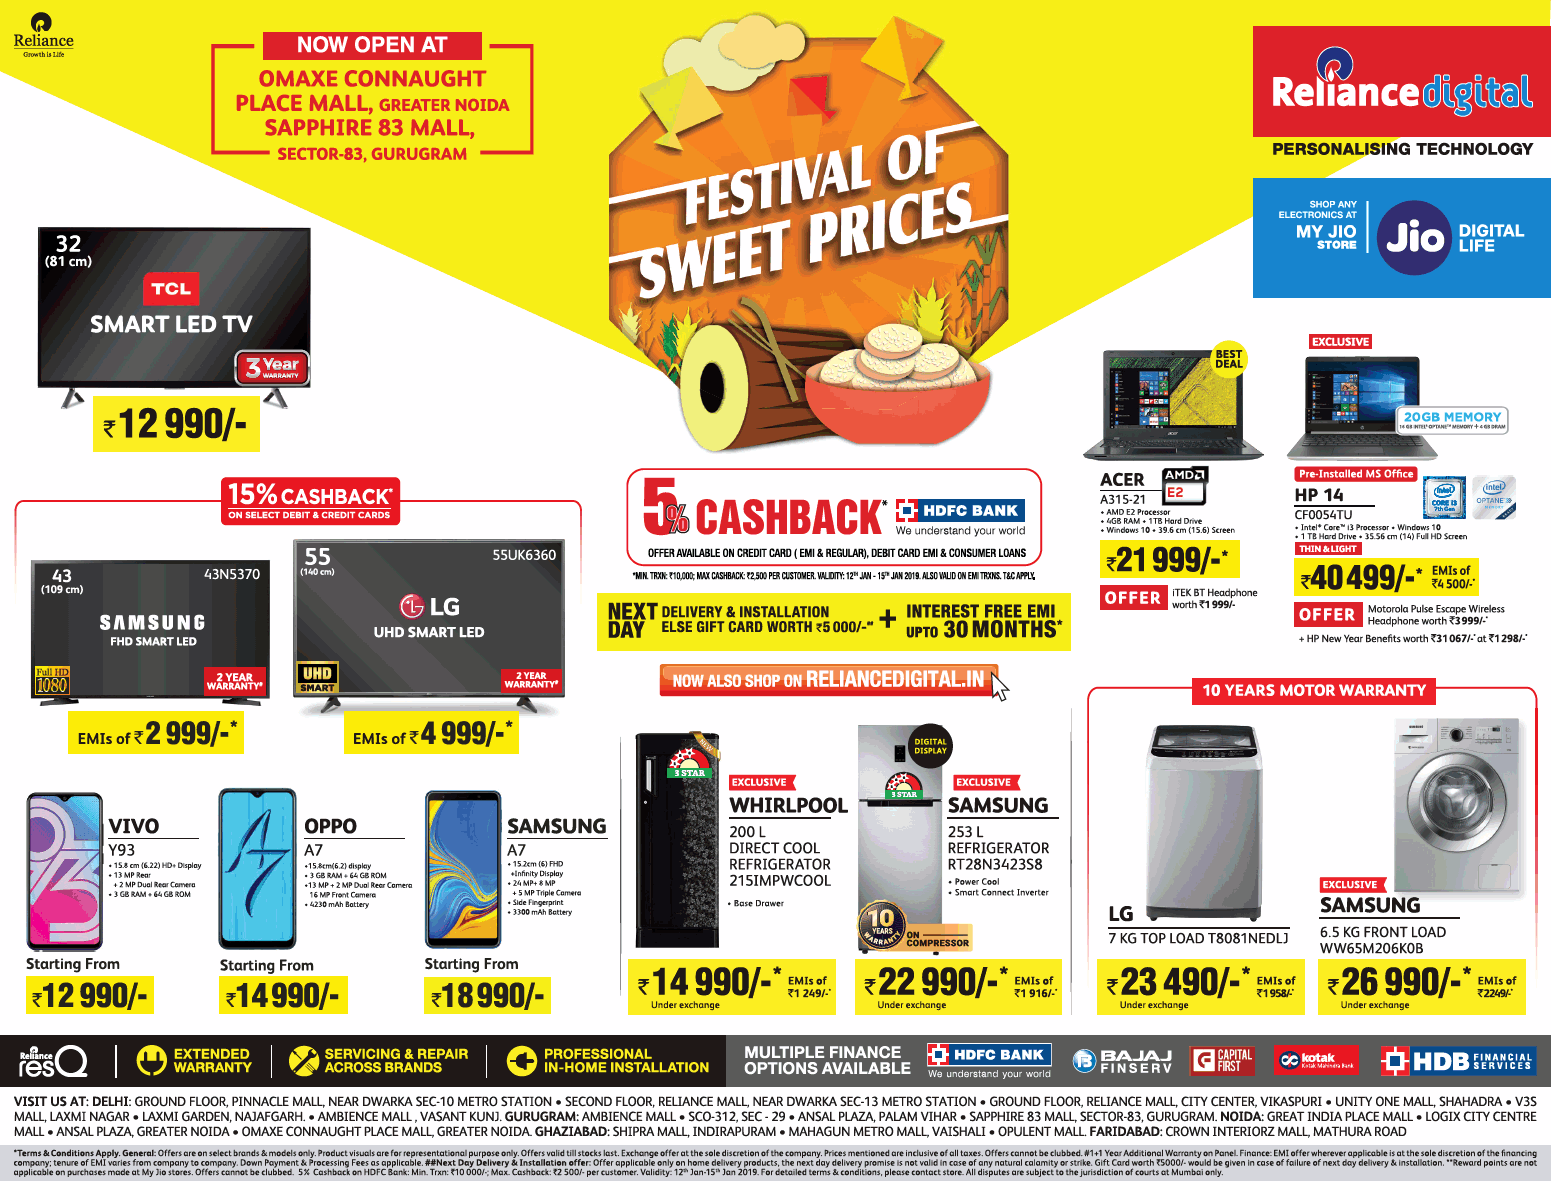 reliance-digital-festival-of-sweet-prices-ad-delhi-times-12-01-2019.png